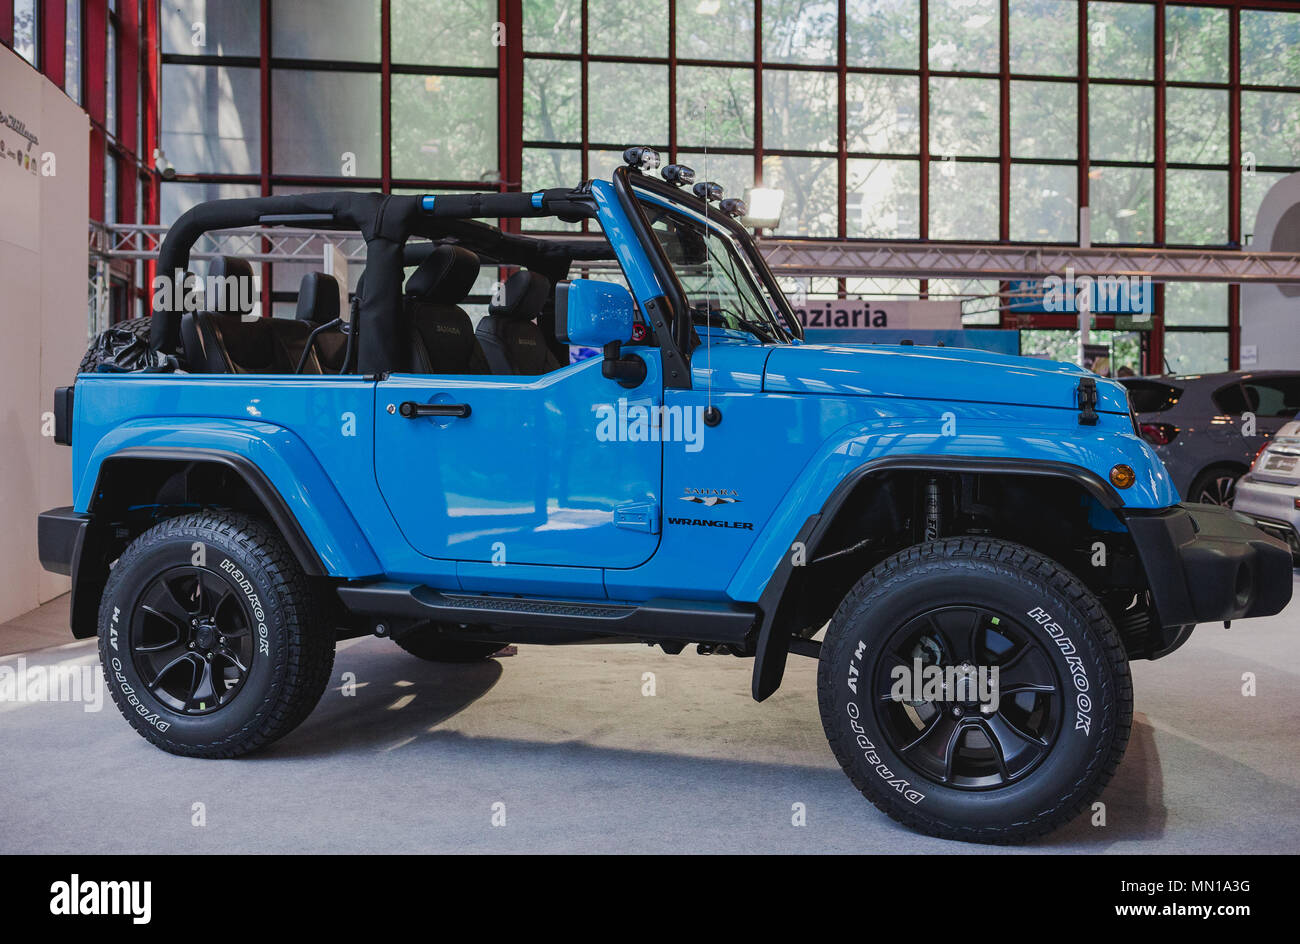 Naples Campania Italy 12th May 18 Jeep Wrangler Sahara Exhibited During The Motor Experience Naples International Auto And Motorcycle Exhibition Credit Ernesto Vicinanza Sopa Images Zuma Wire Alamy Live News Stock Photo Alamy